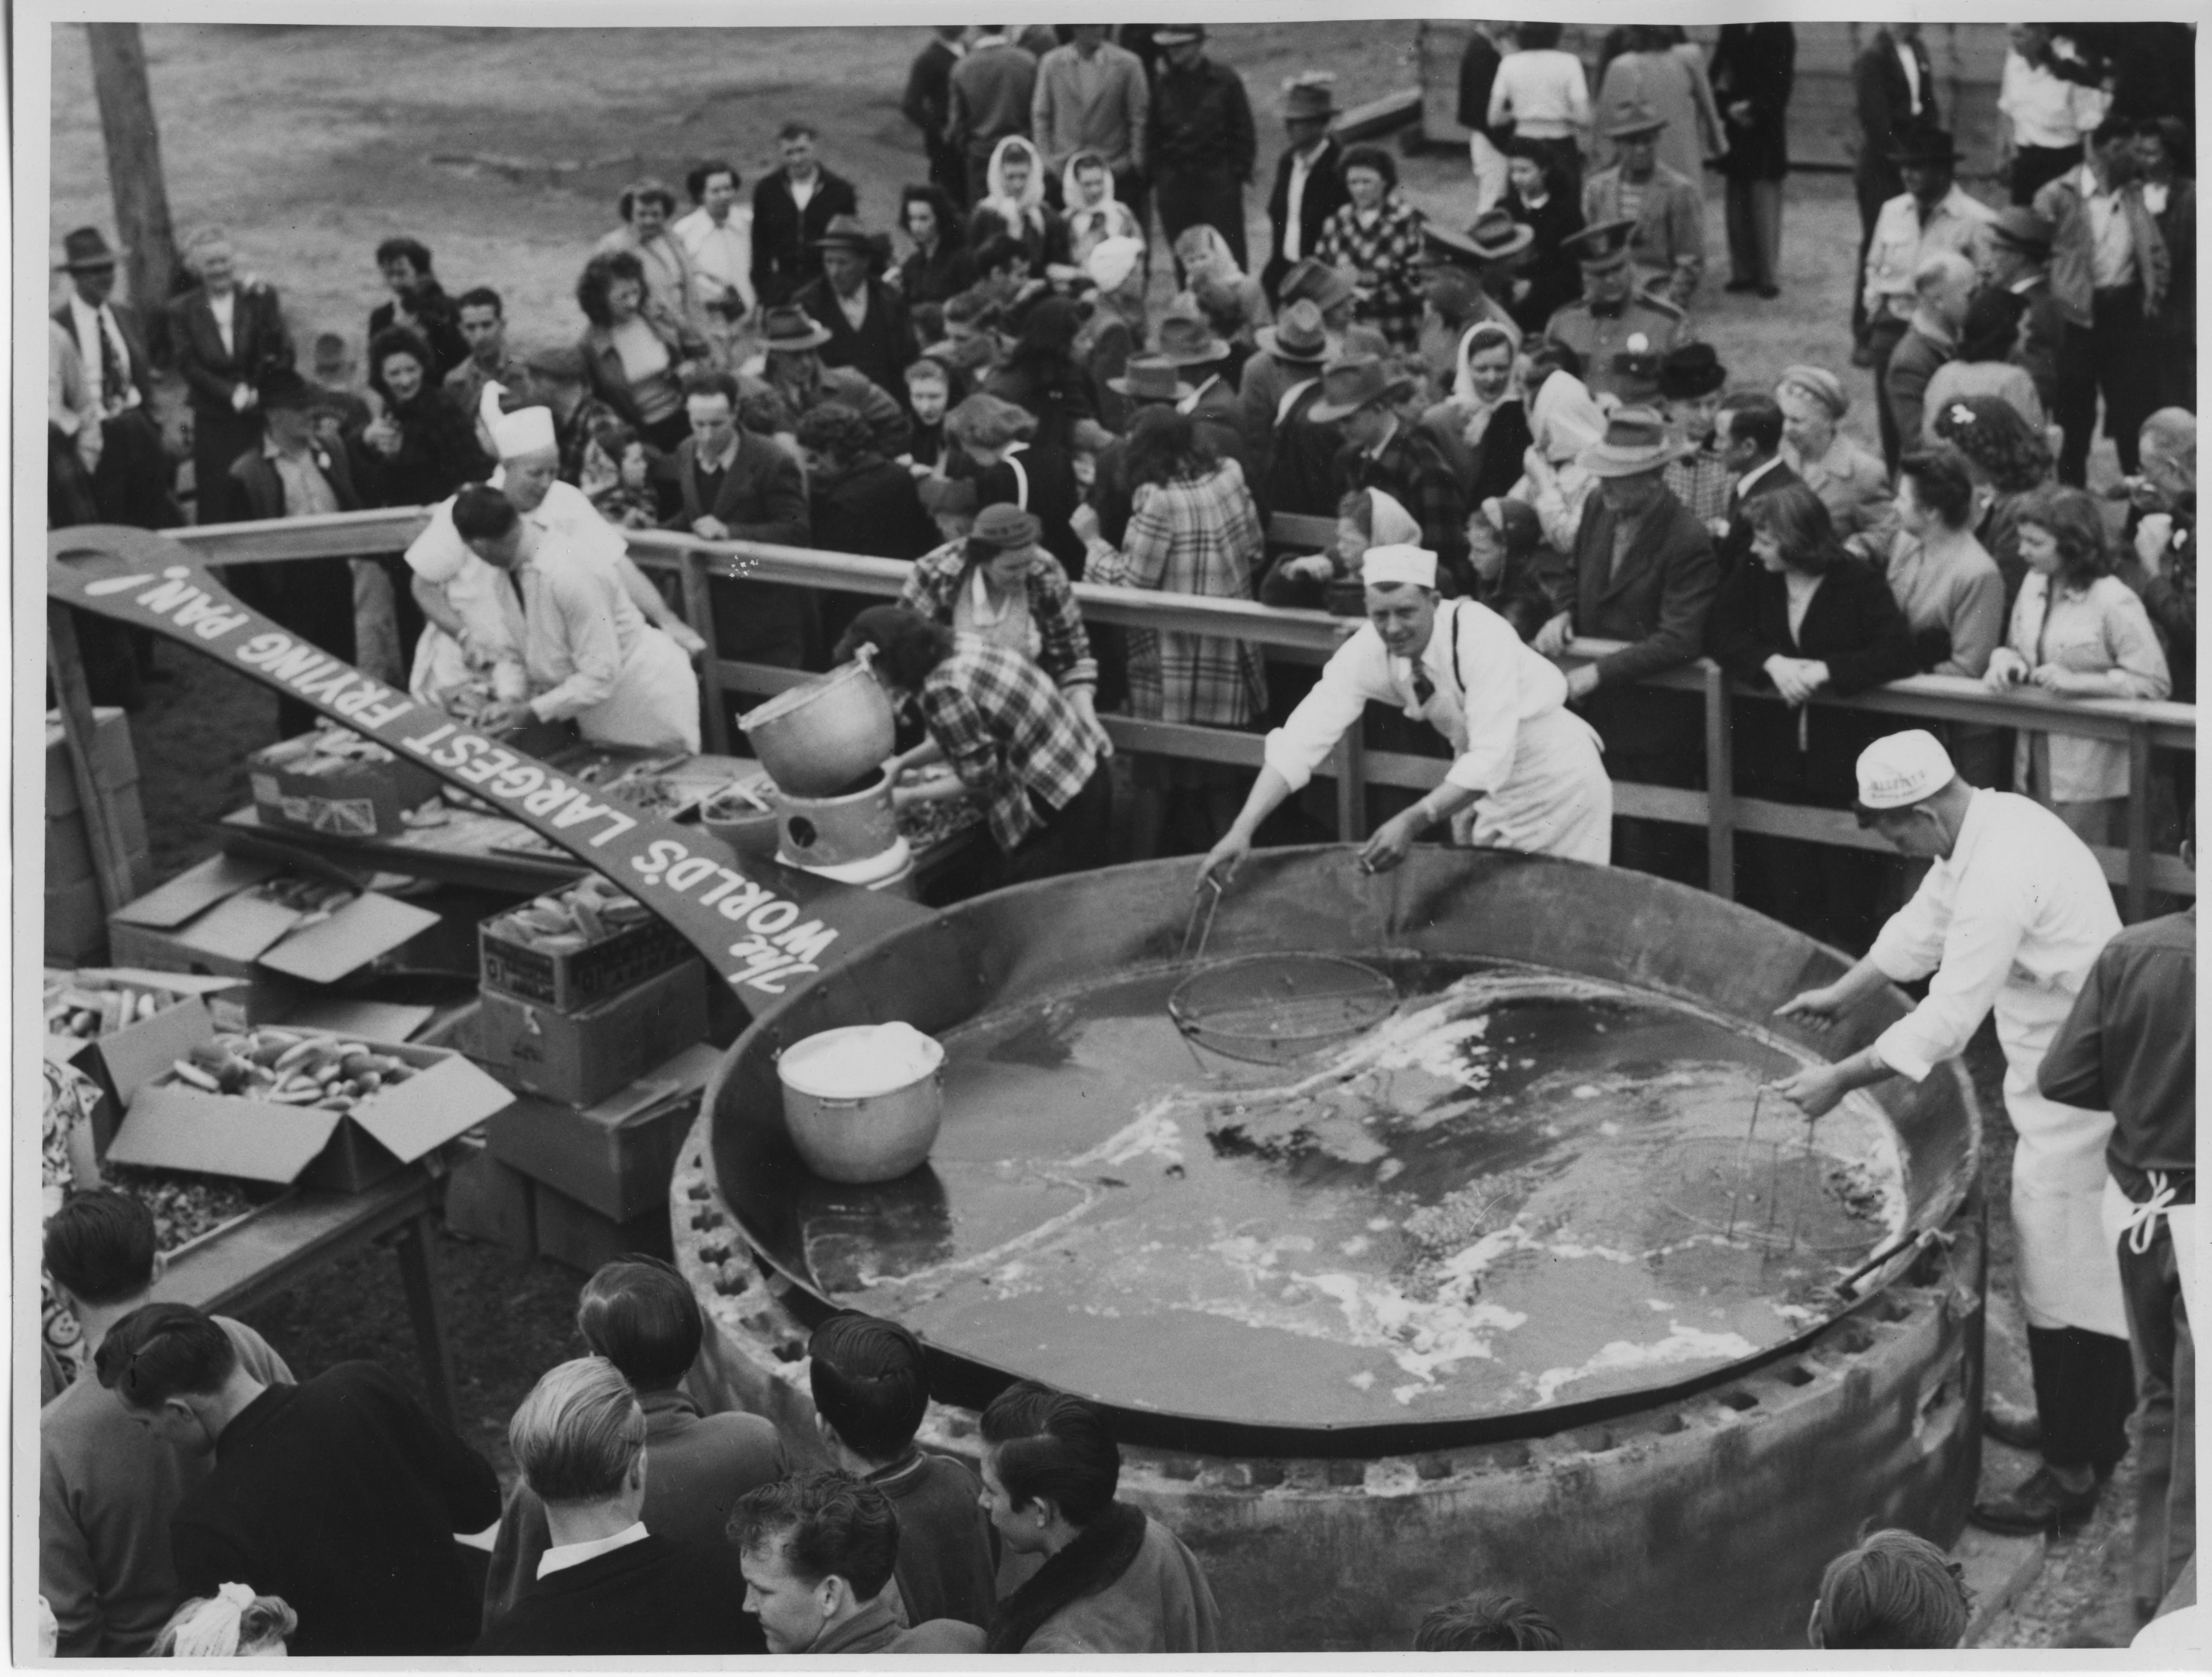 In the 1940s, the World's Largest Clam Pan was used to fry razor clams during the Long Beach Clam Festival. Photo credit: Columbia Pacific Heritage Museum.